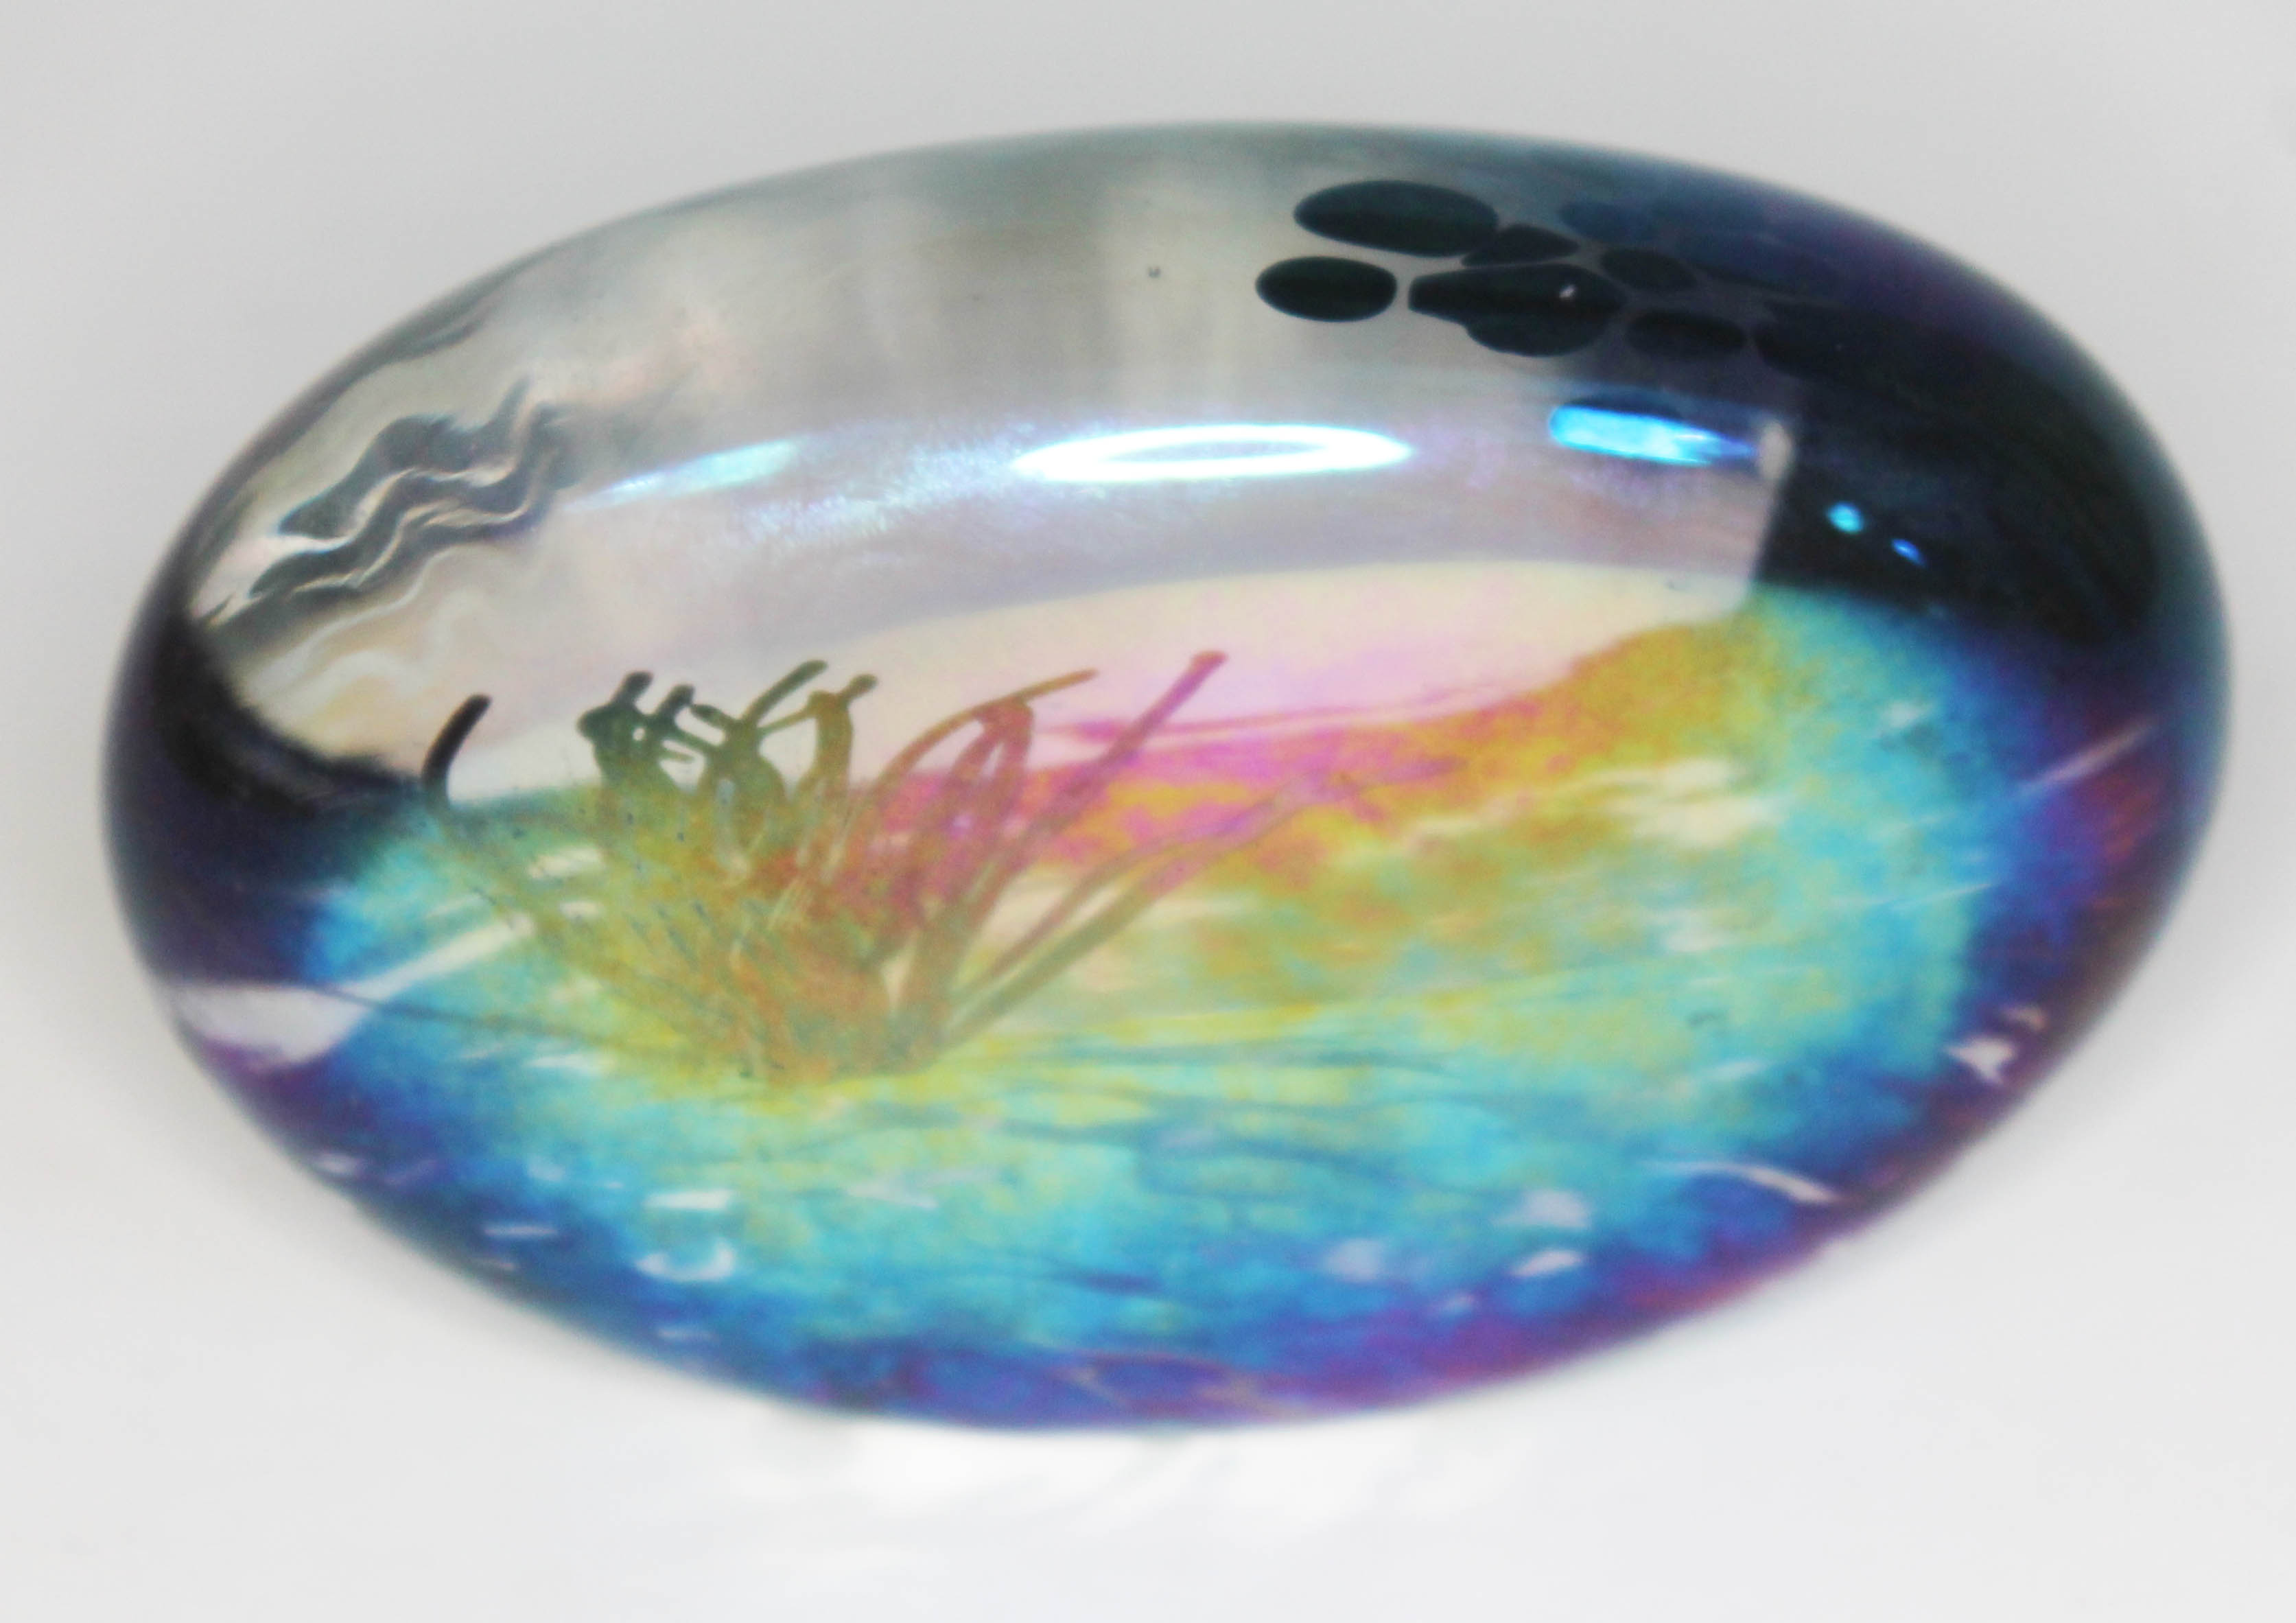 A Glasform art glass paperweight by John Ditchfield, signed and stickered, length 11cm.